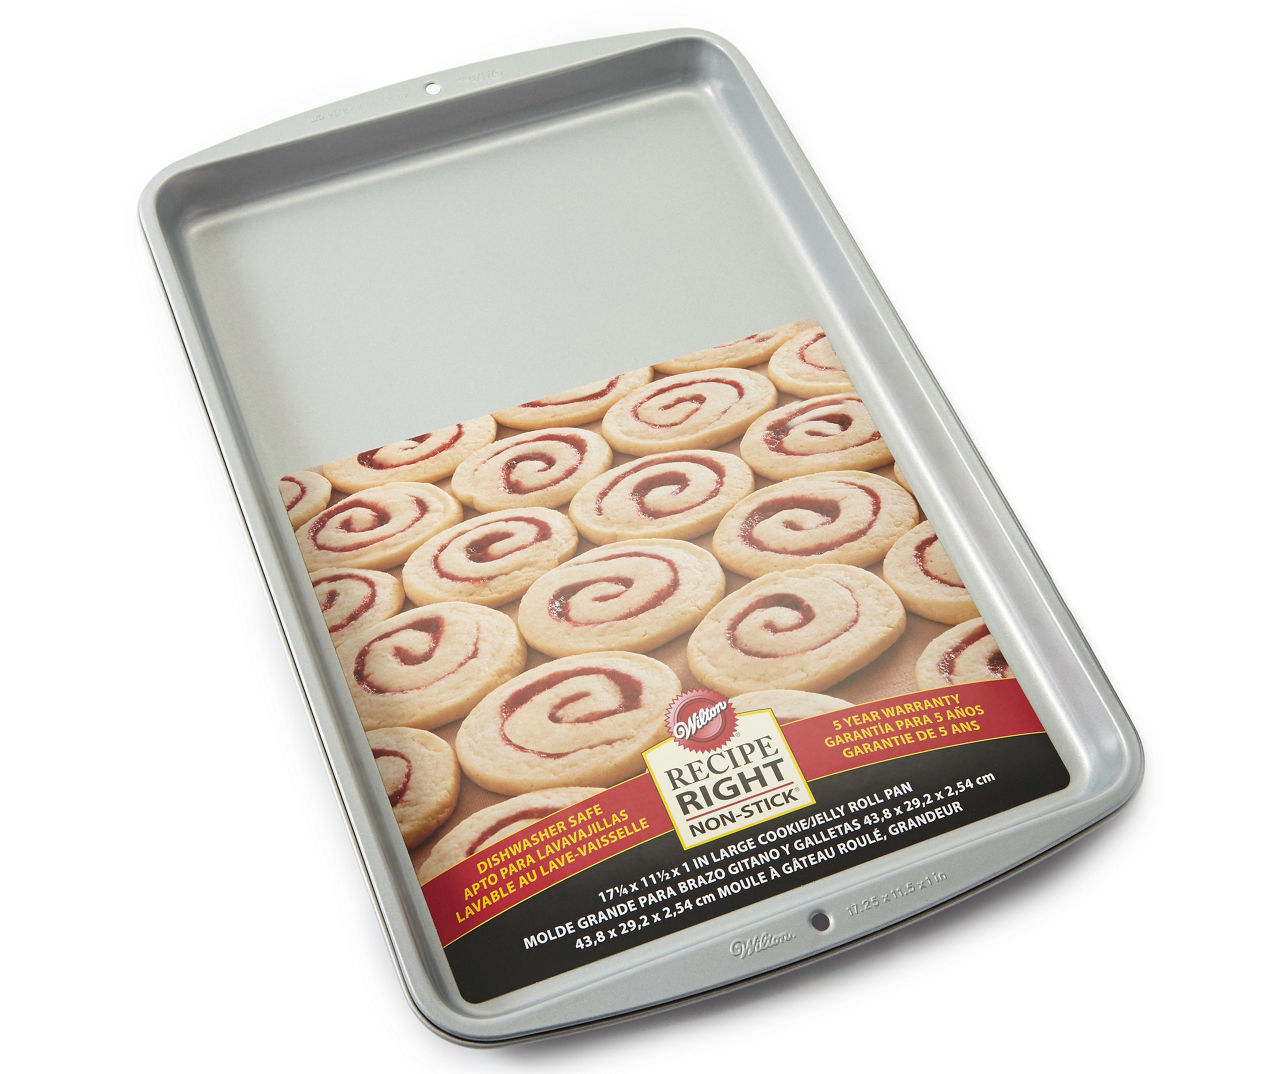 17 x 11 Recipe Right Cookie/Jelly Roll Pan